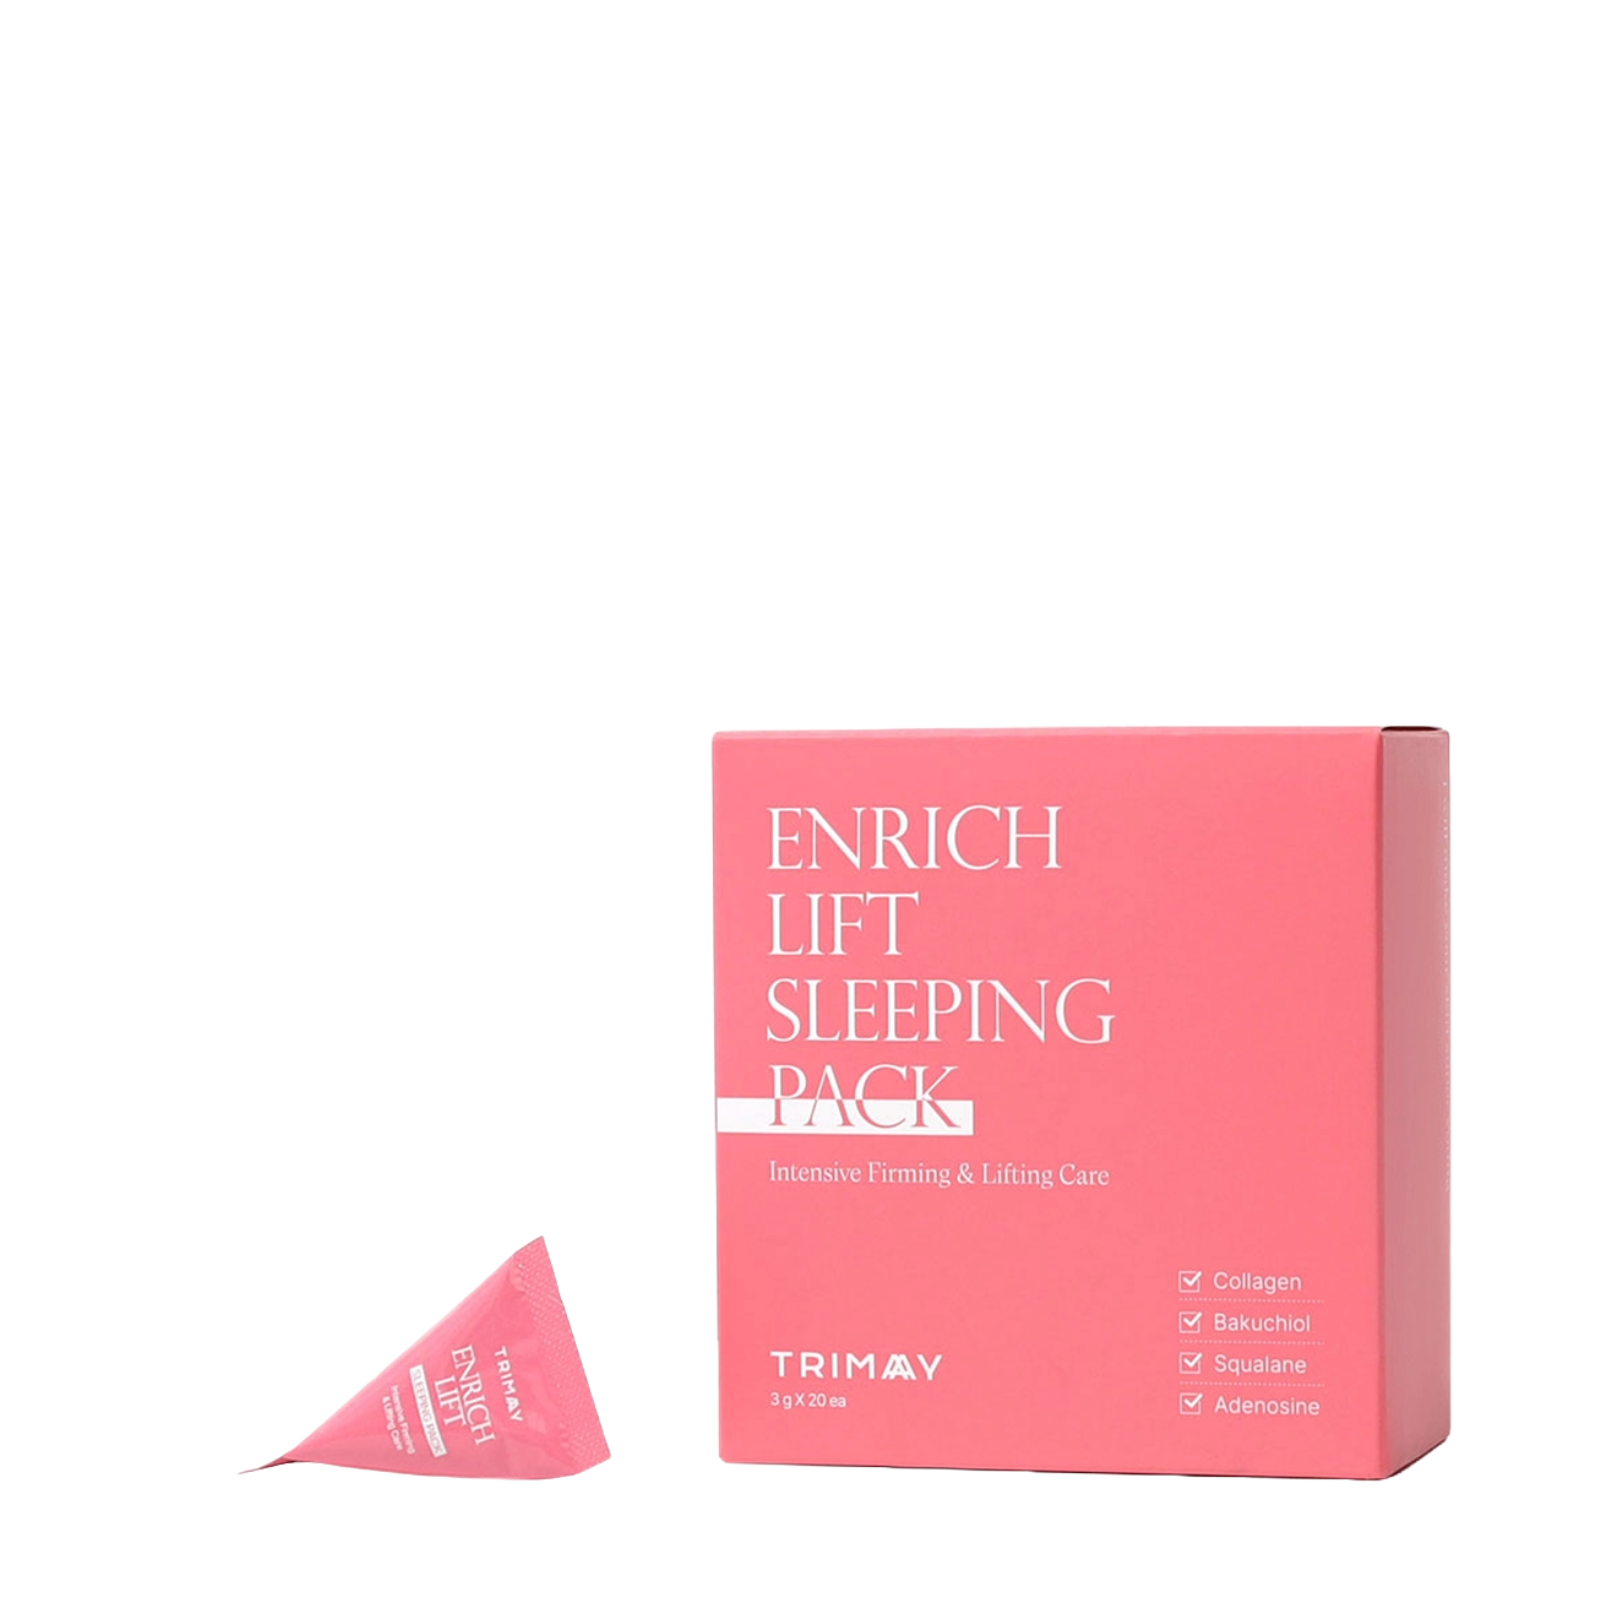 Night mask with collagen and bakuchiol by Trimay (Trimay Enrich-Lift Sleeping Pack)